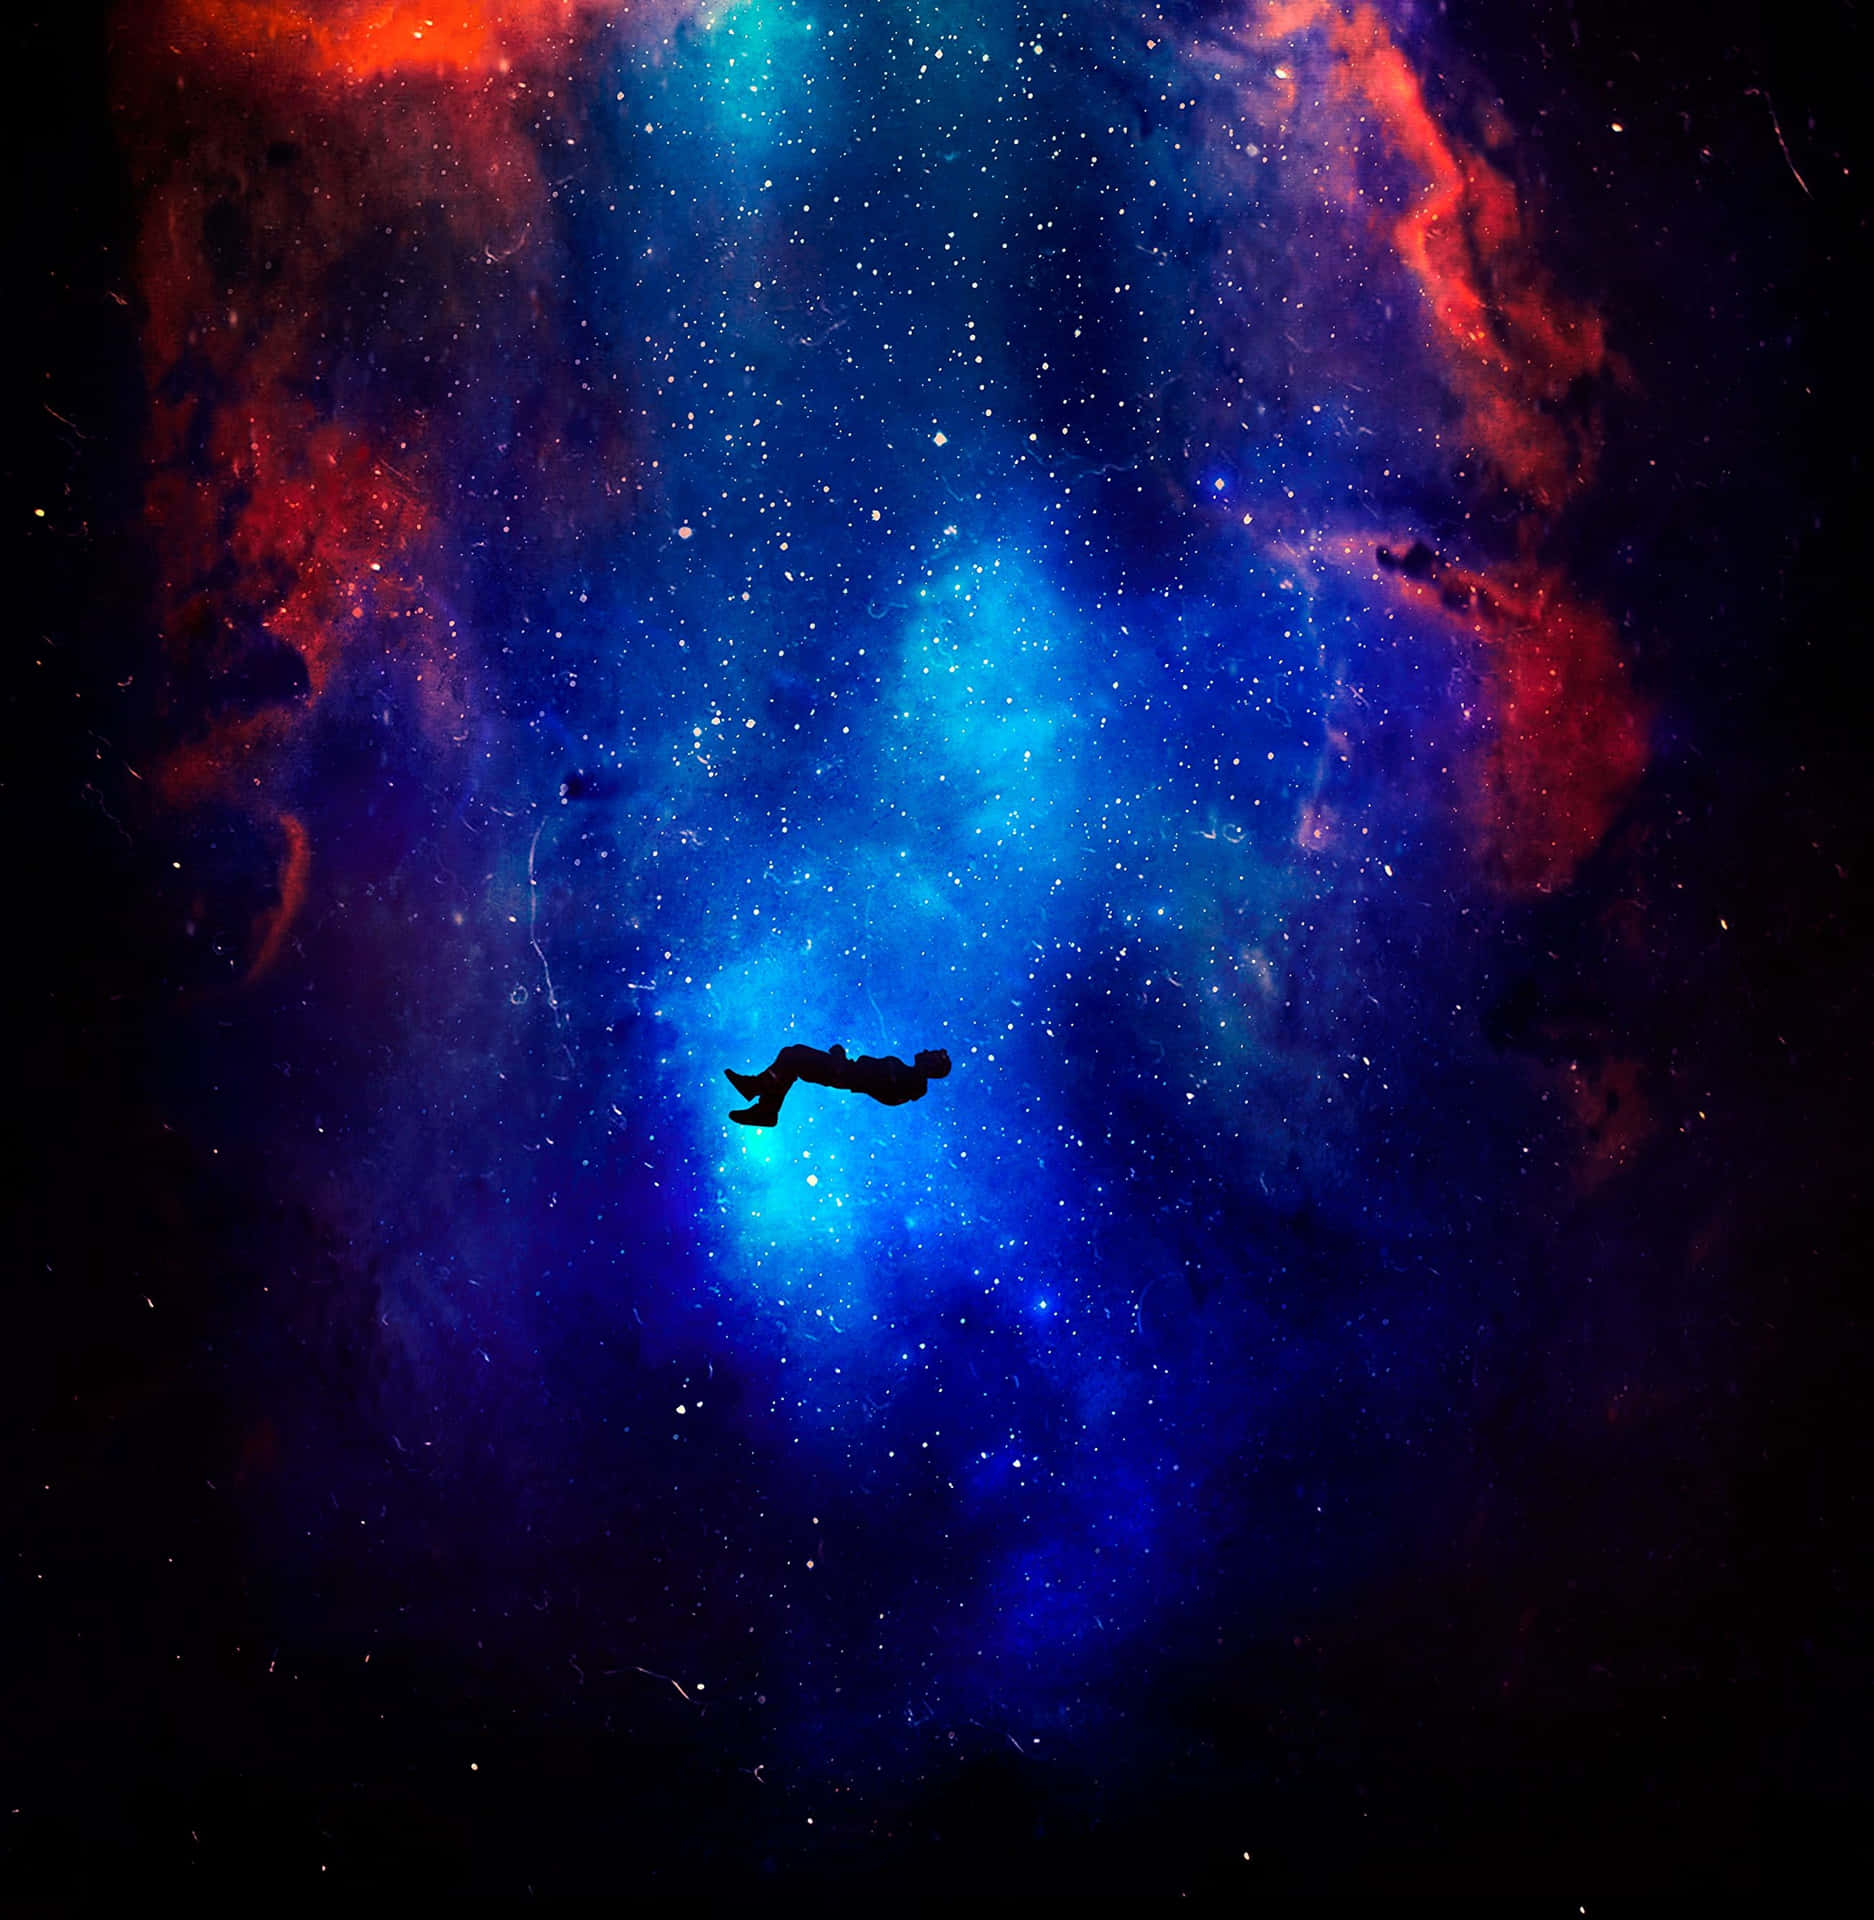 Feel the power of Android in space Wallpaper